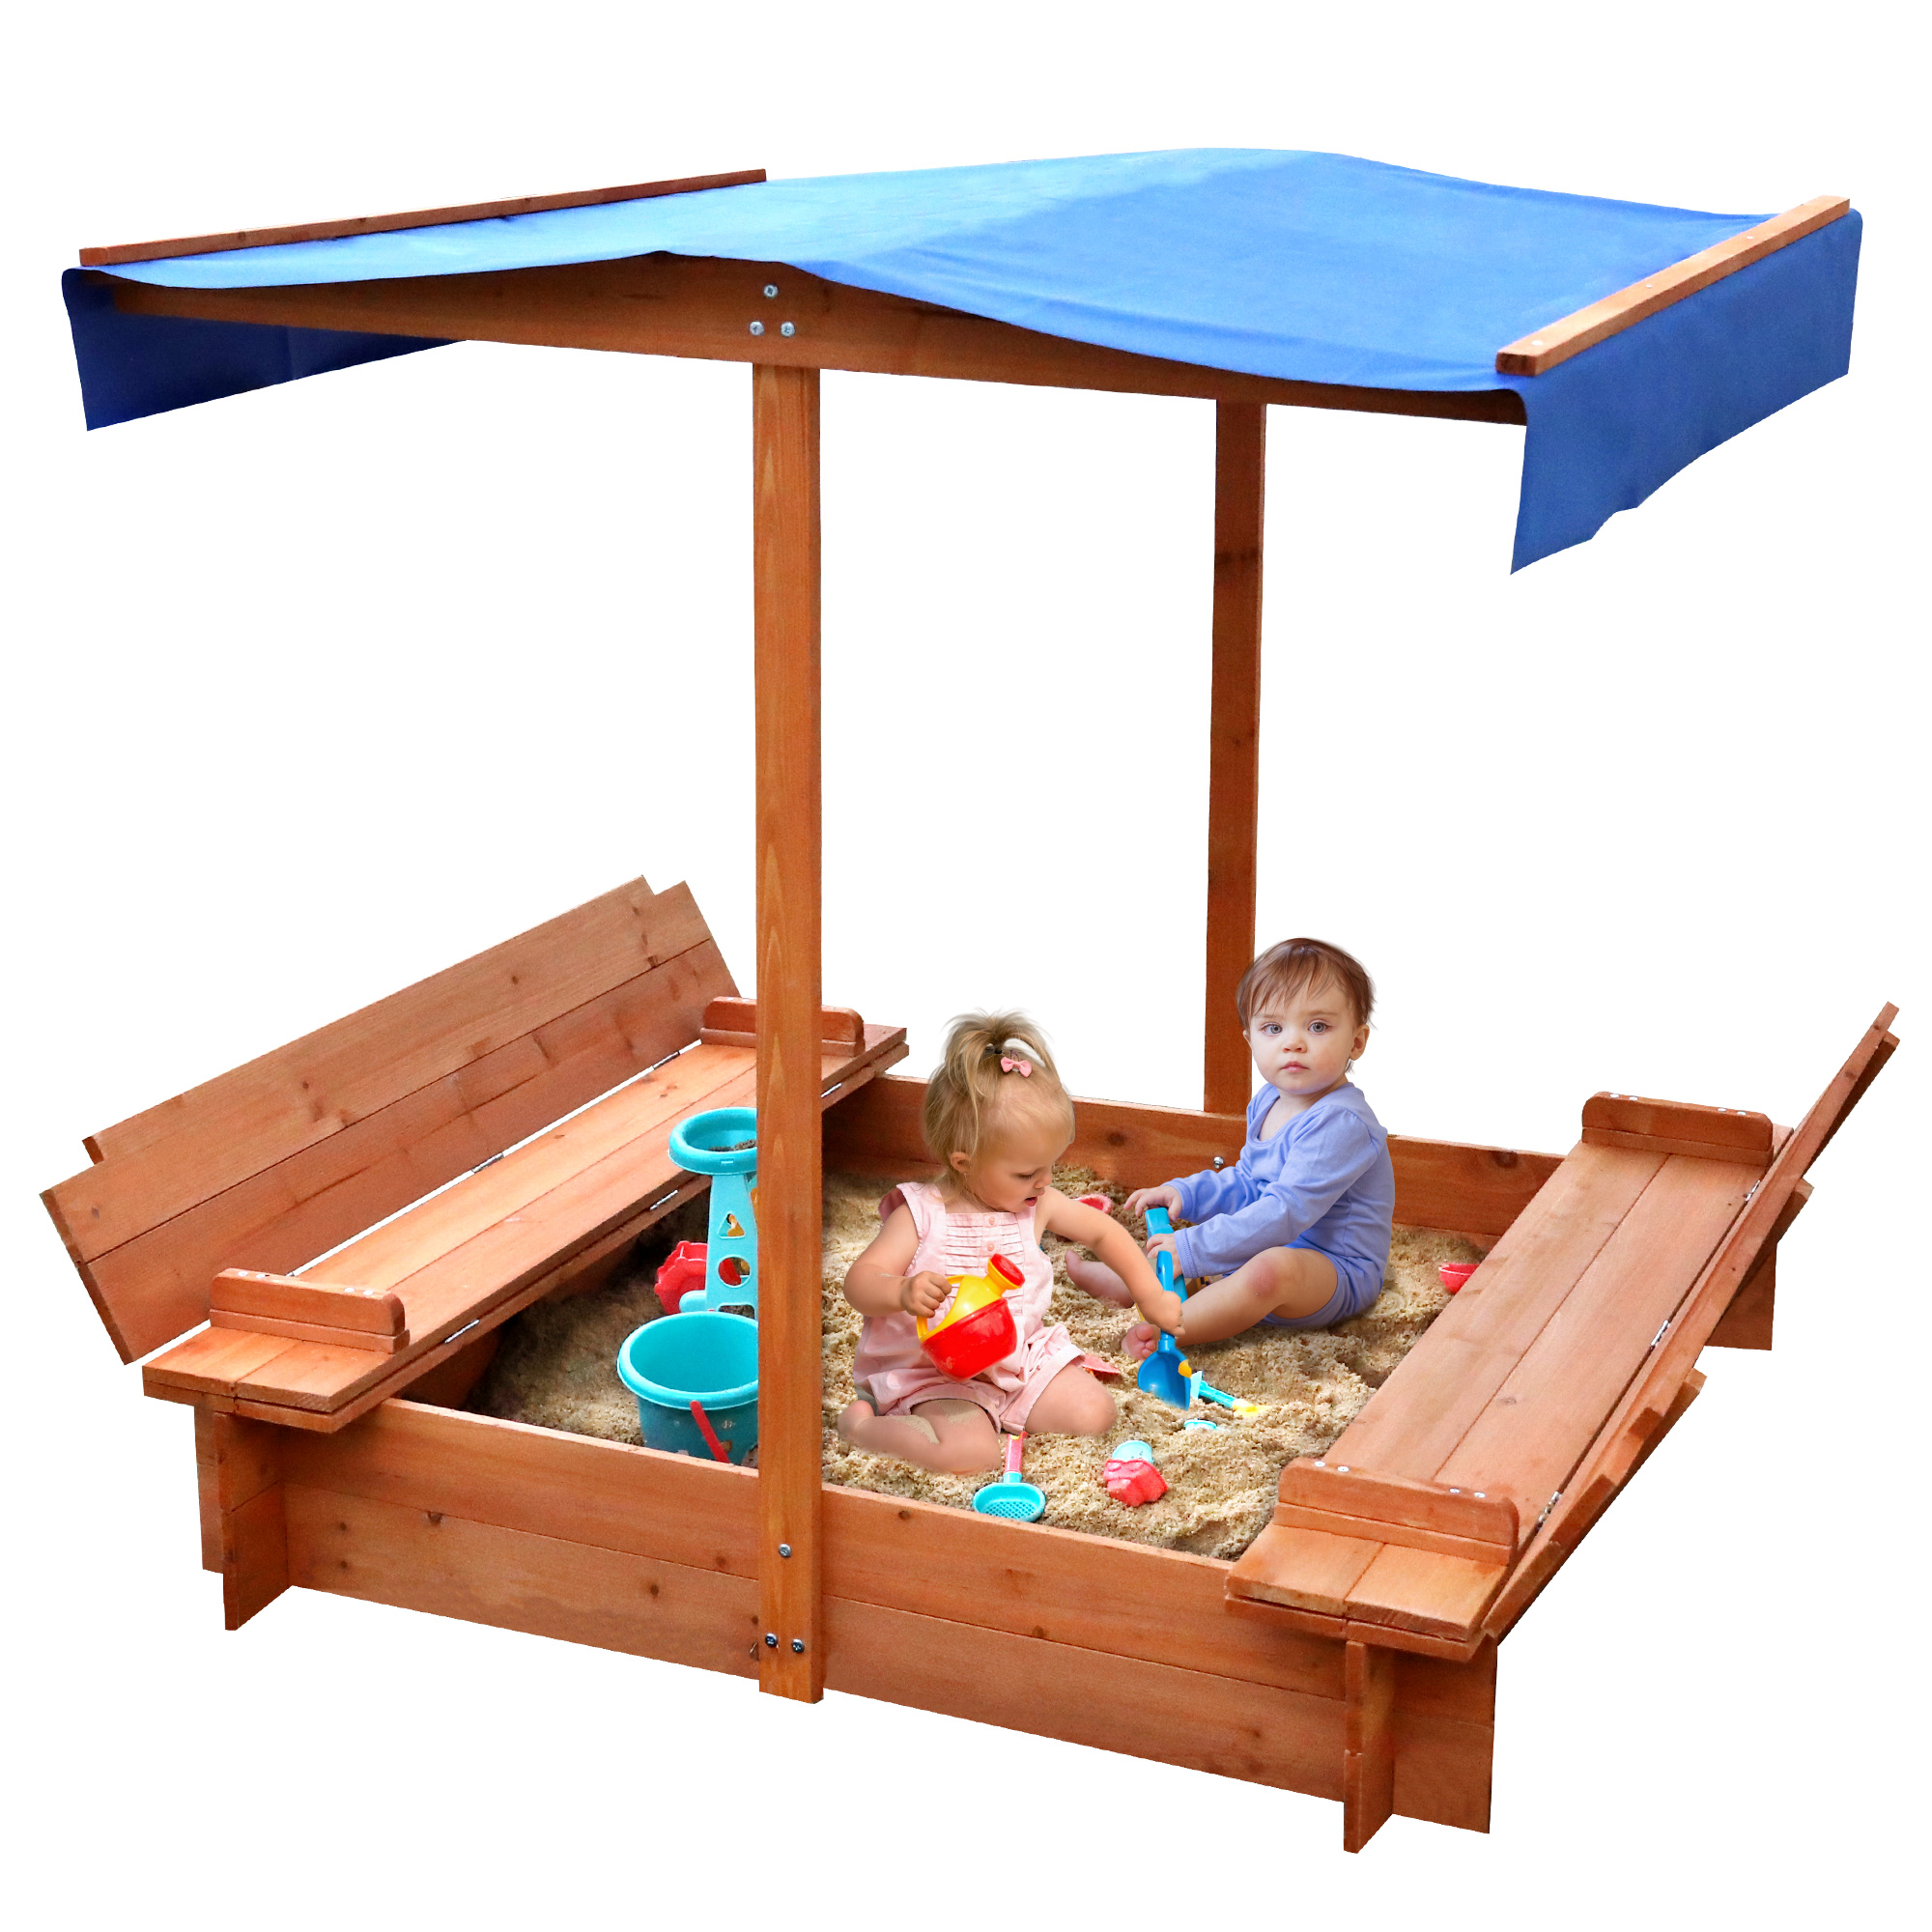 FUNTOK Wooden Sandbox with Cover, 48x48"Sand Boxes for Kids w/ 2 Foldable Bench Seats & UV-Resistant Canopy, Children Outdoor Sandbox w/ Lid for Backyard Lawn - image 1 of 8